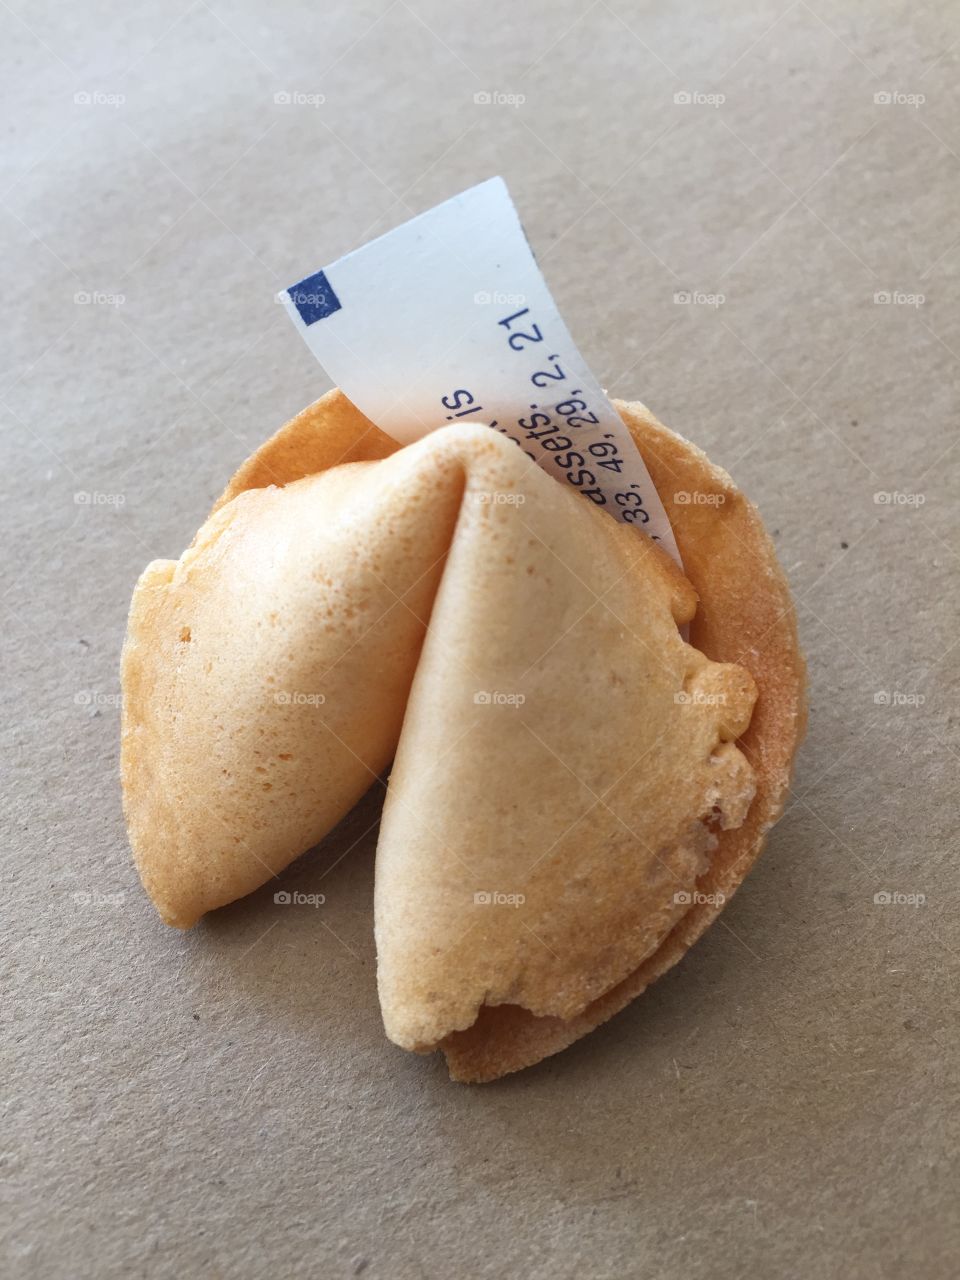 Fortune cookie. Fortune cookie with message sticking out